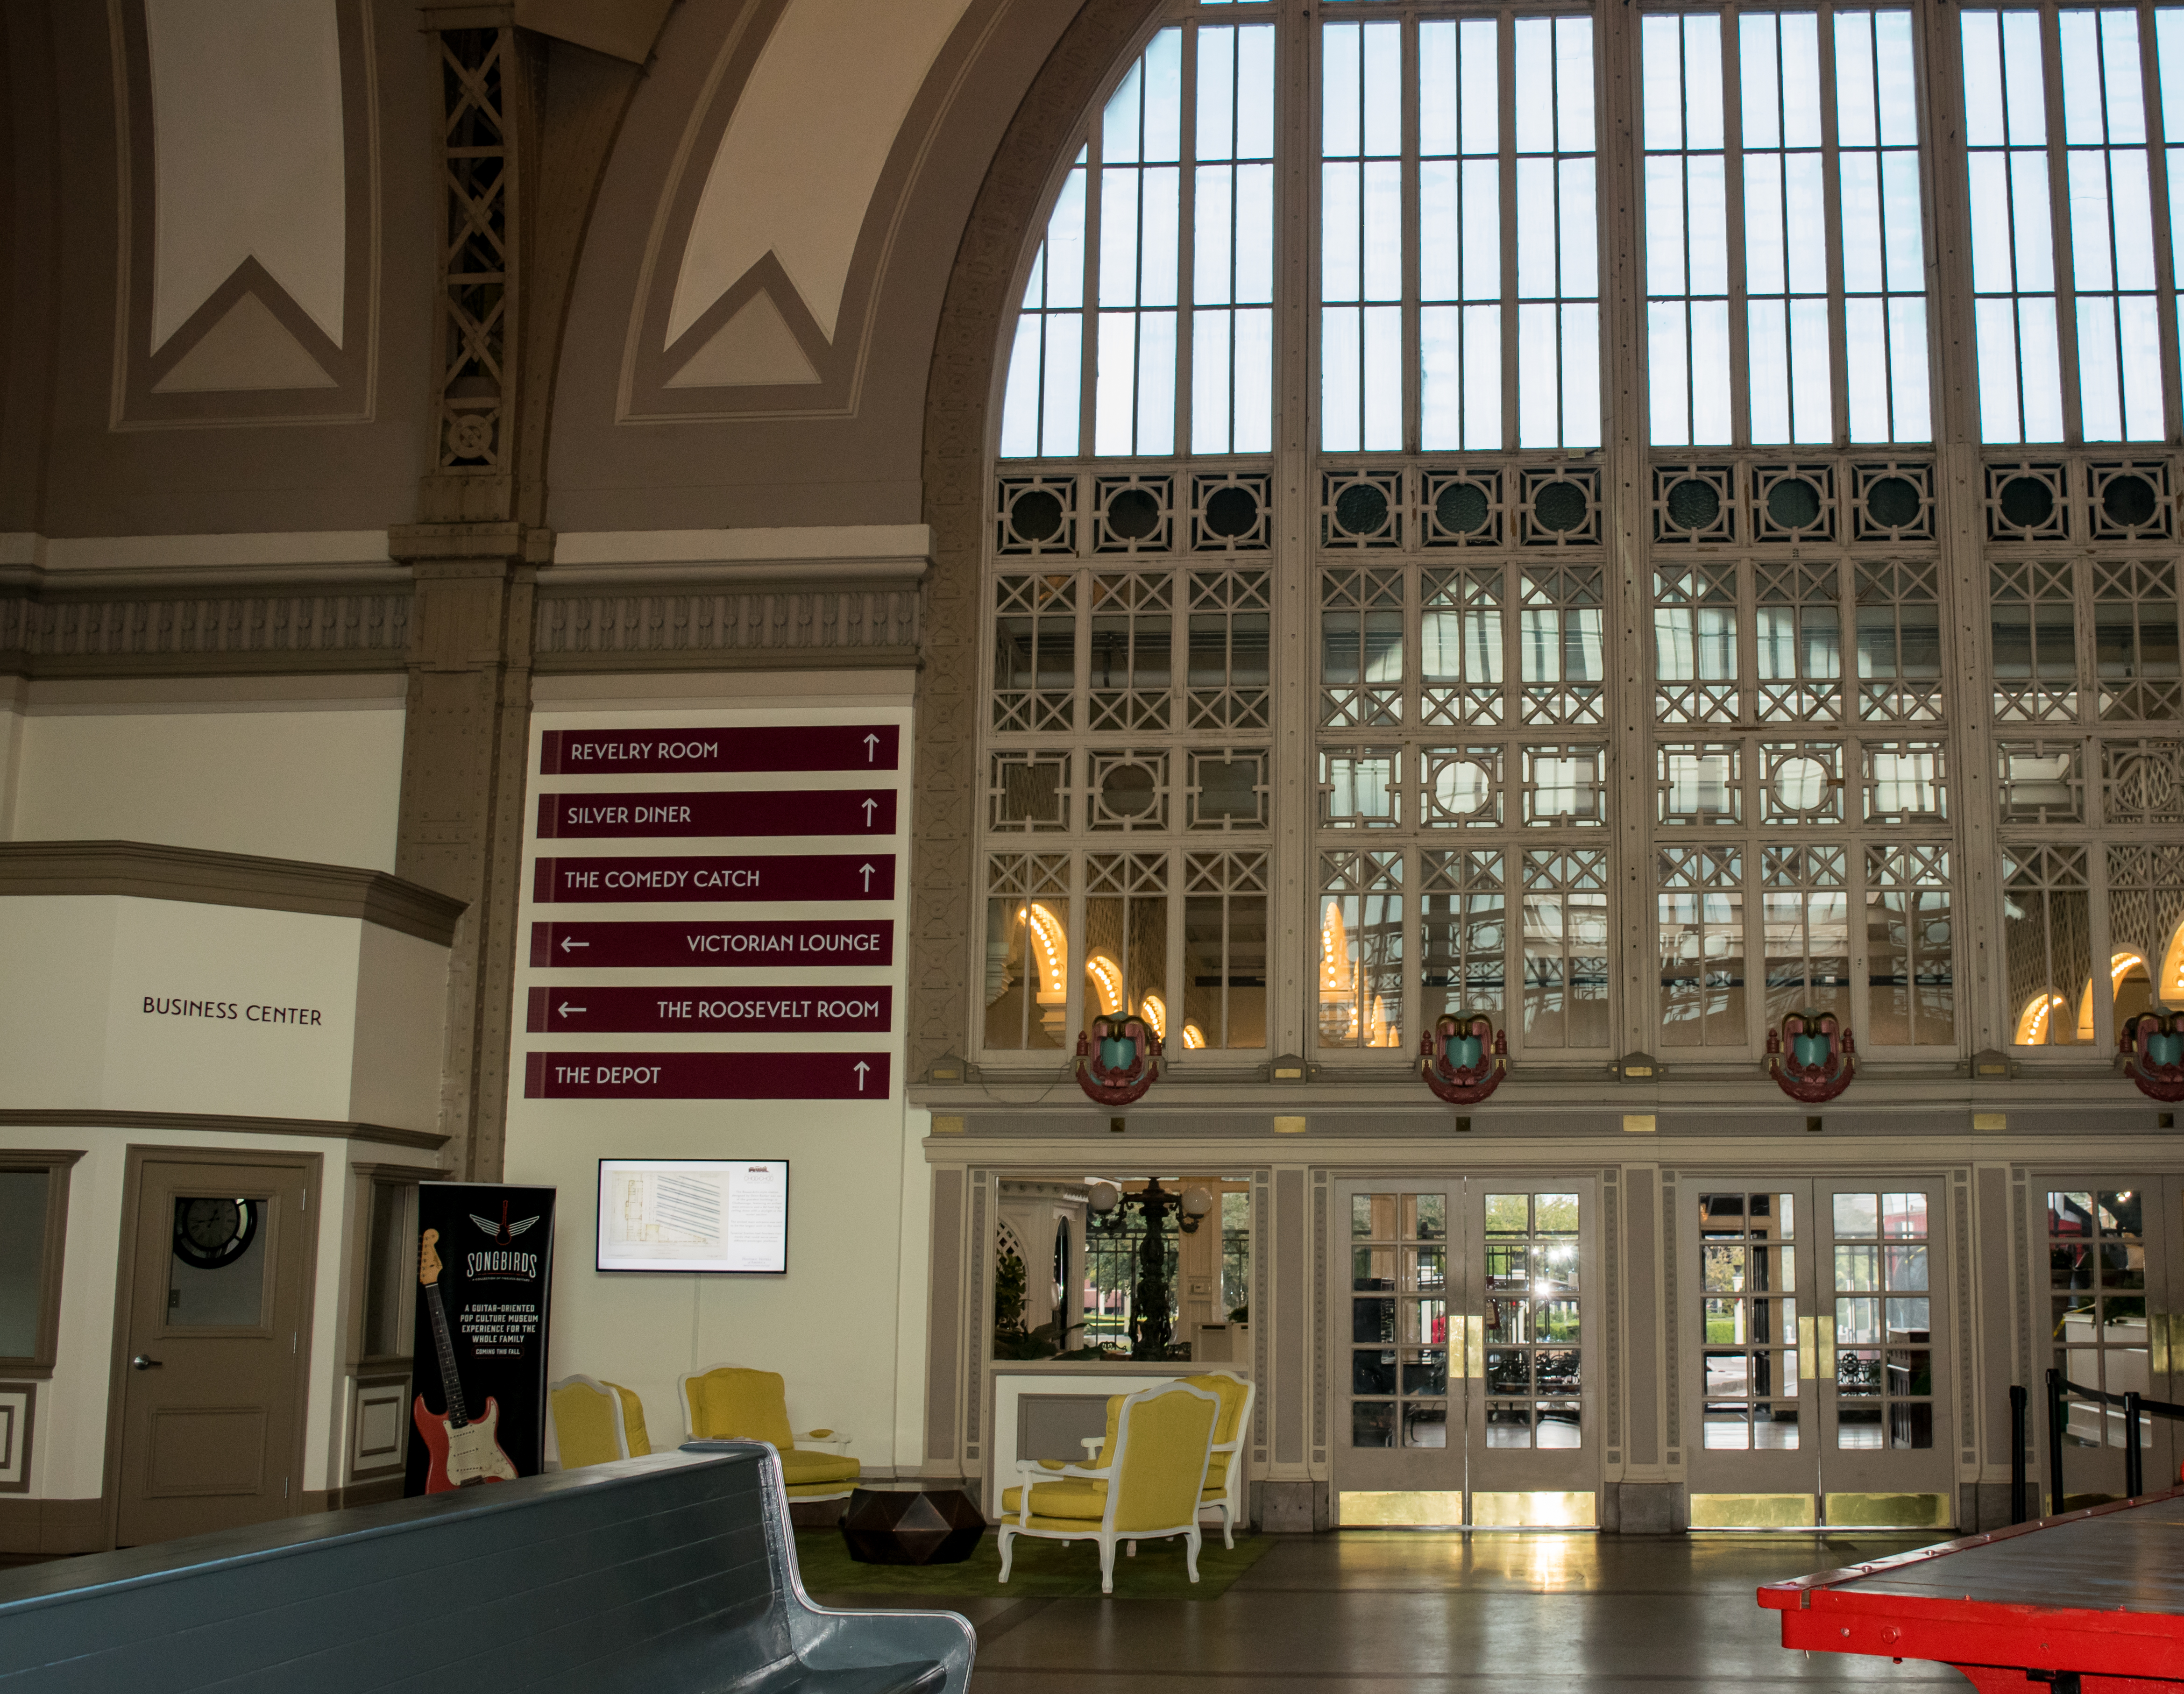 Terminal Building with arched windows and view of garden courtyard - Chattanooga Choo Choo